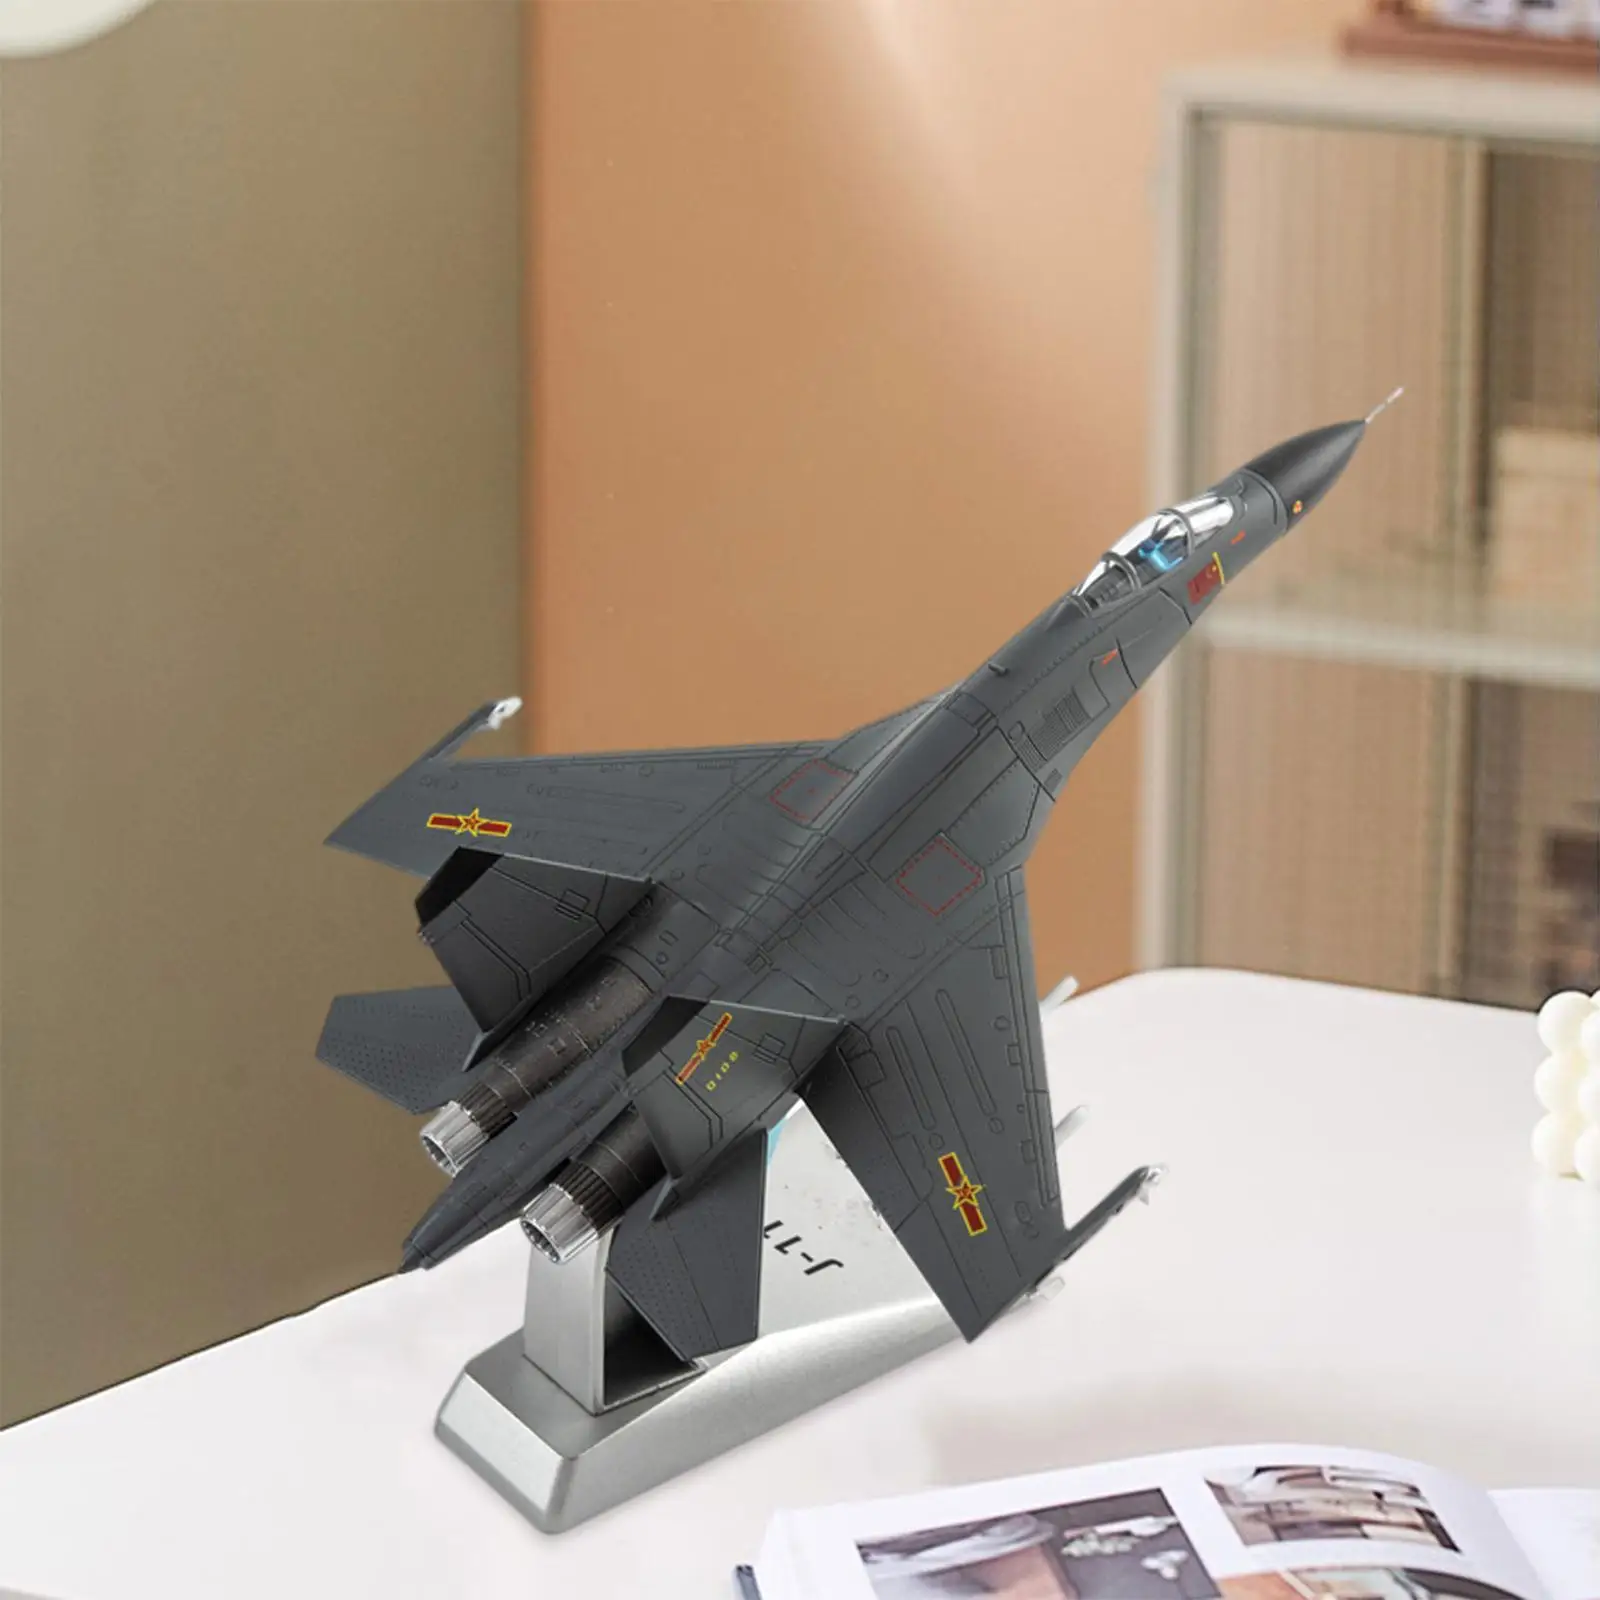 Alloy Diecast 1/100 Scale Aircraft J-11 Fighter Collectables Ornaments with Dispaly Stand Model Plane